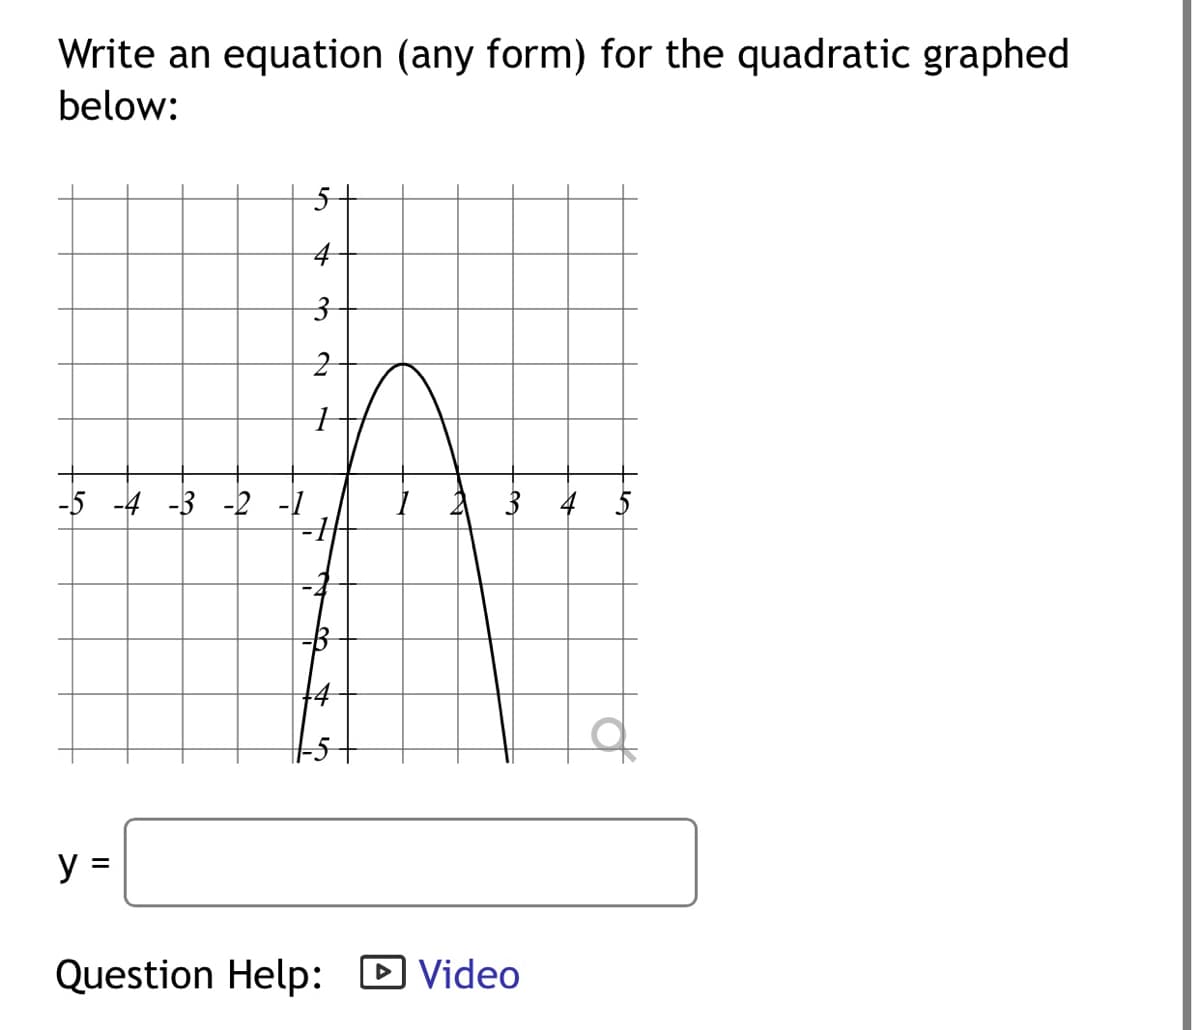 Write an equation (any form) for the quadratic graphed
below:
-5 -4 -3 -2 -1
y =
5
4
3
2
1
2
3 4
Question Help: Video
Le
a